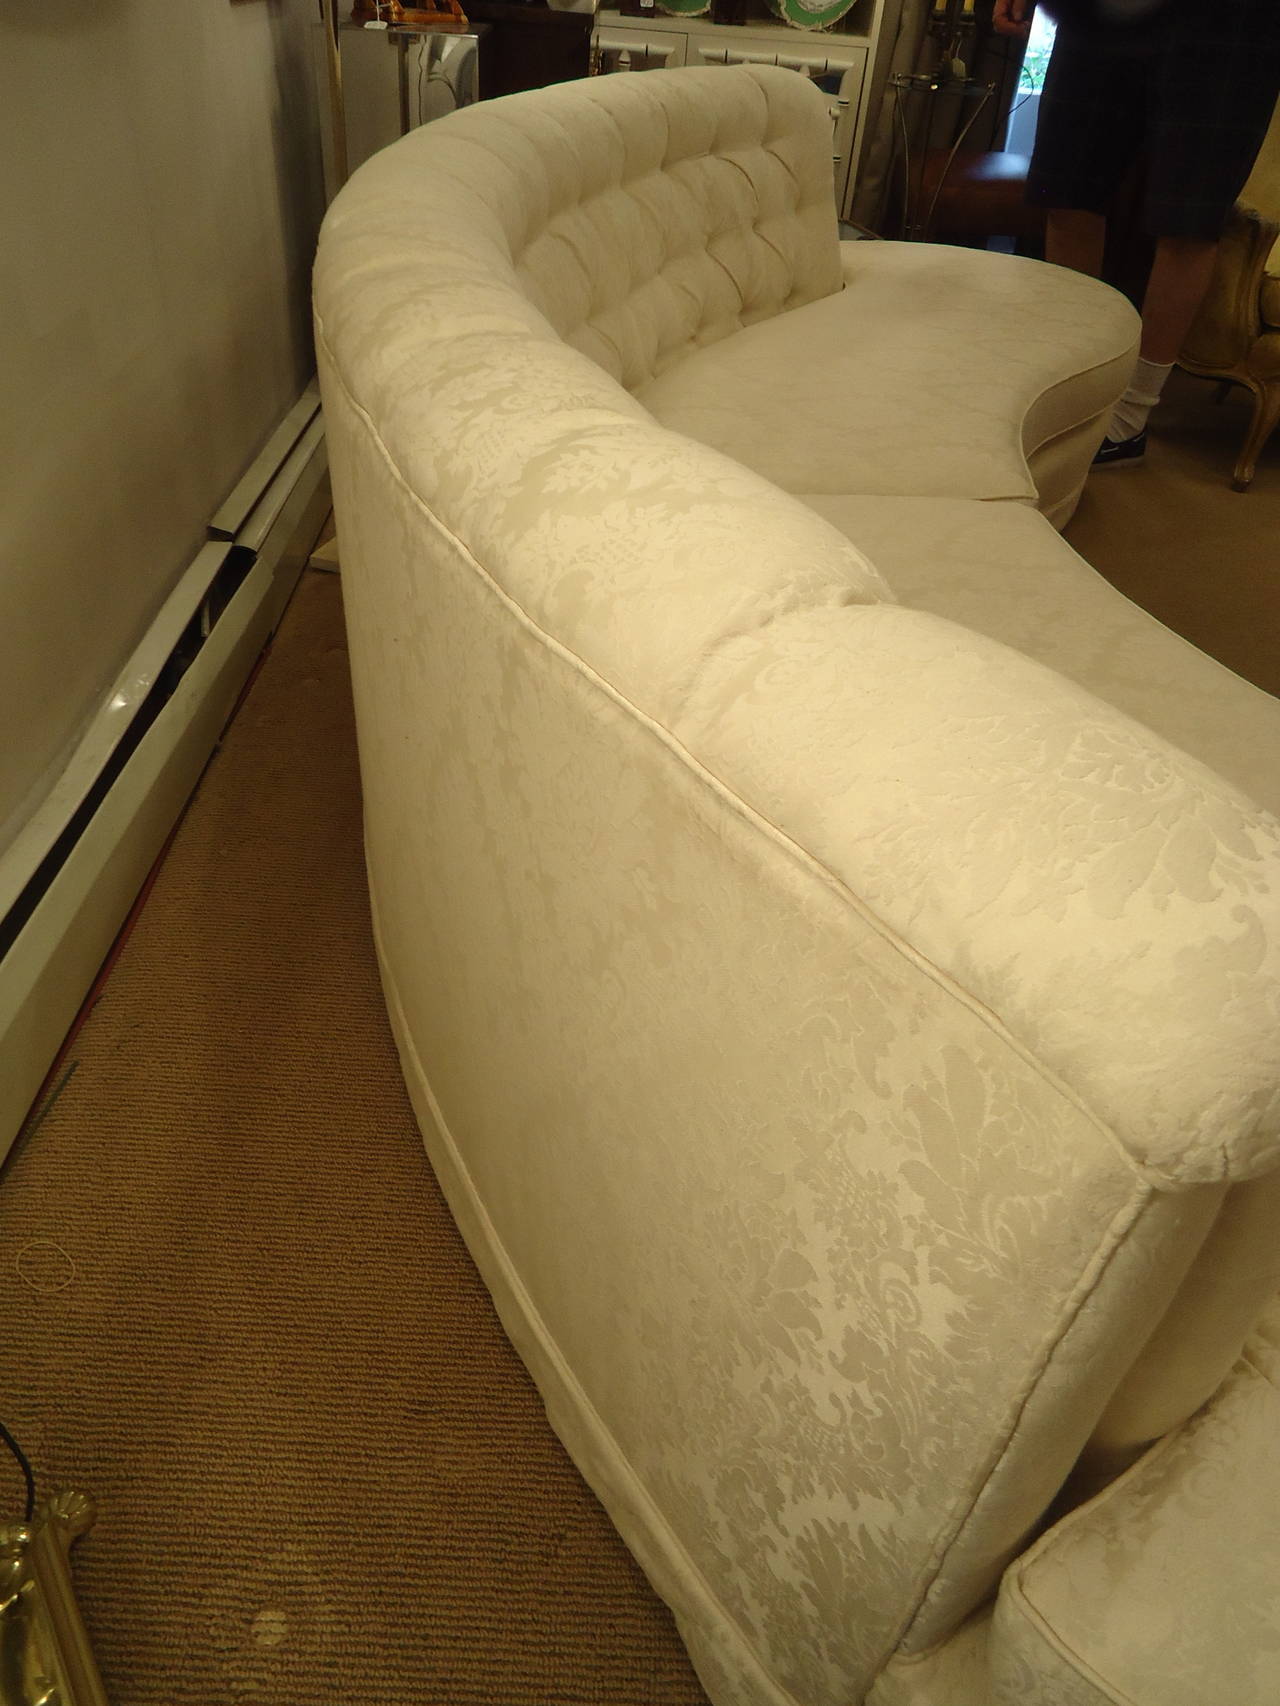 Curvy in all the right places, Hollywood Regency style sofa from the 1970s with tufted back, covered in off-white damask fabric and gorgeous from the front and back.